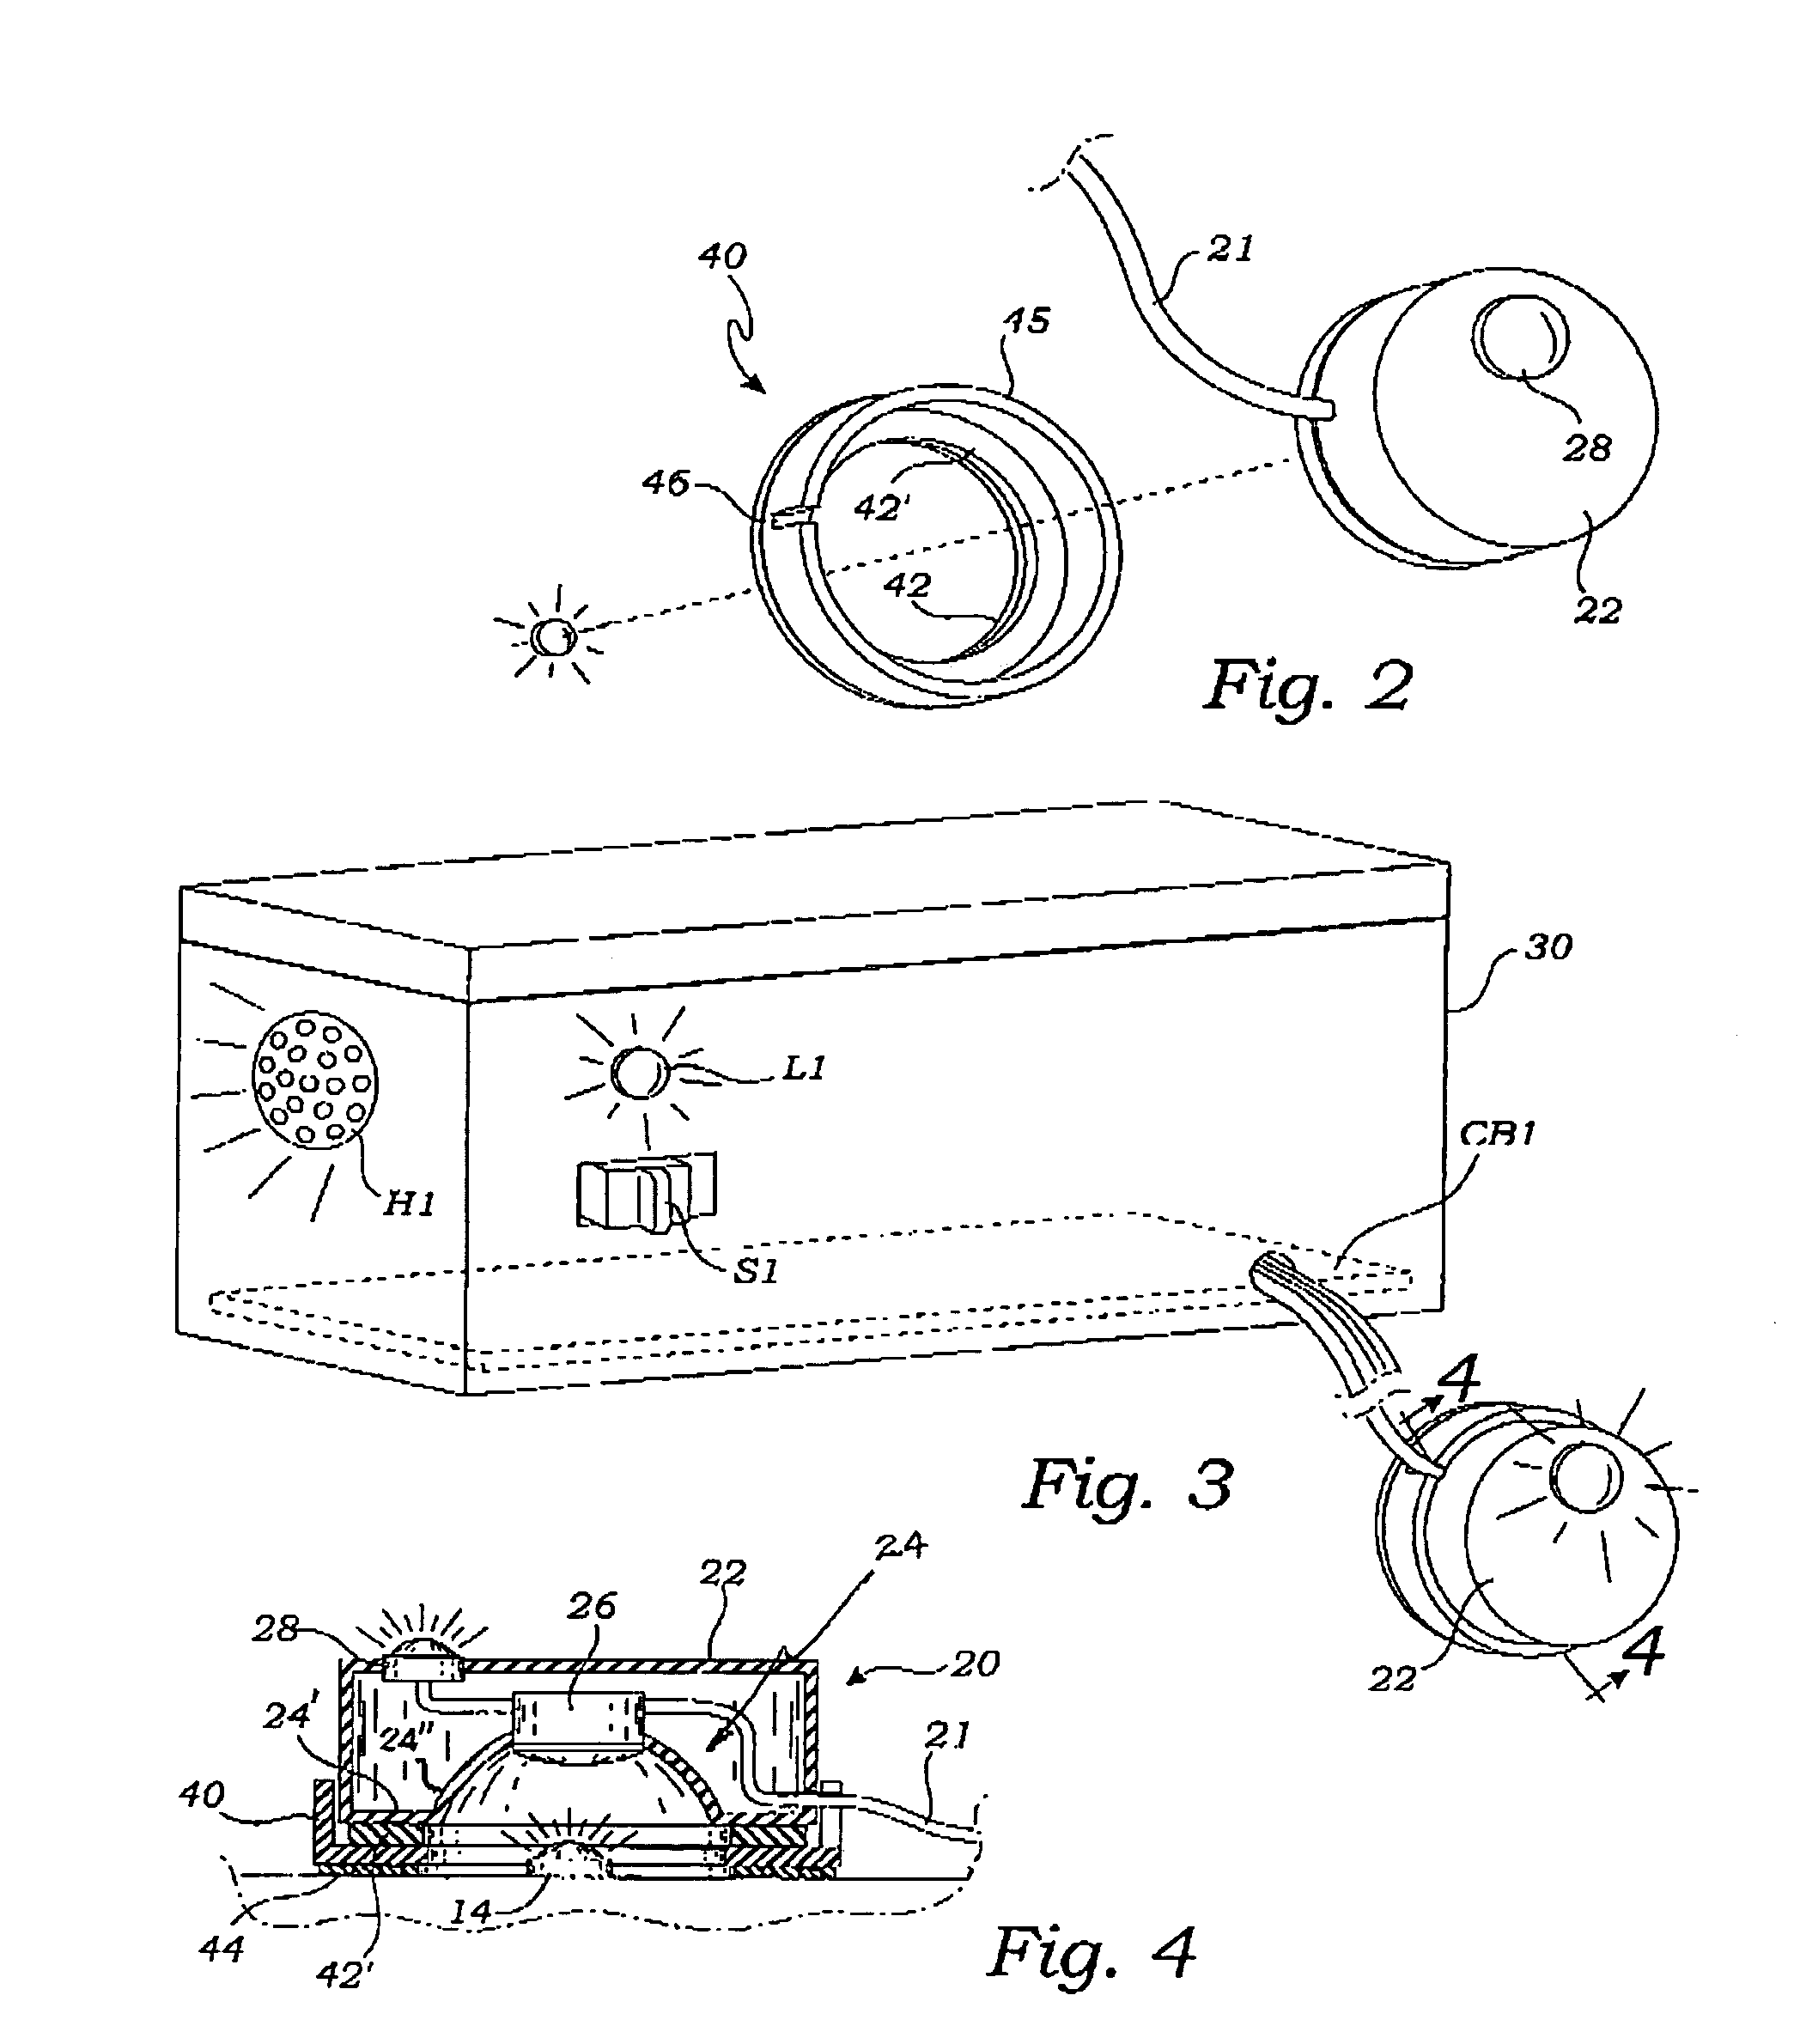 Automatic stove timer and alarm apparatus and method of use